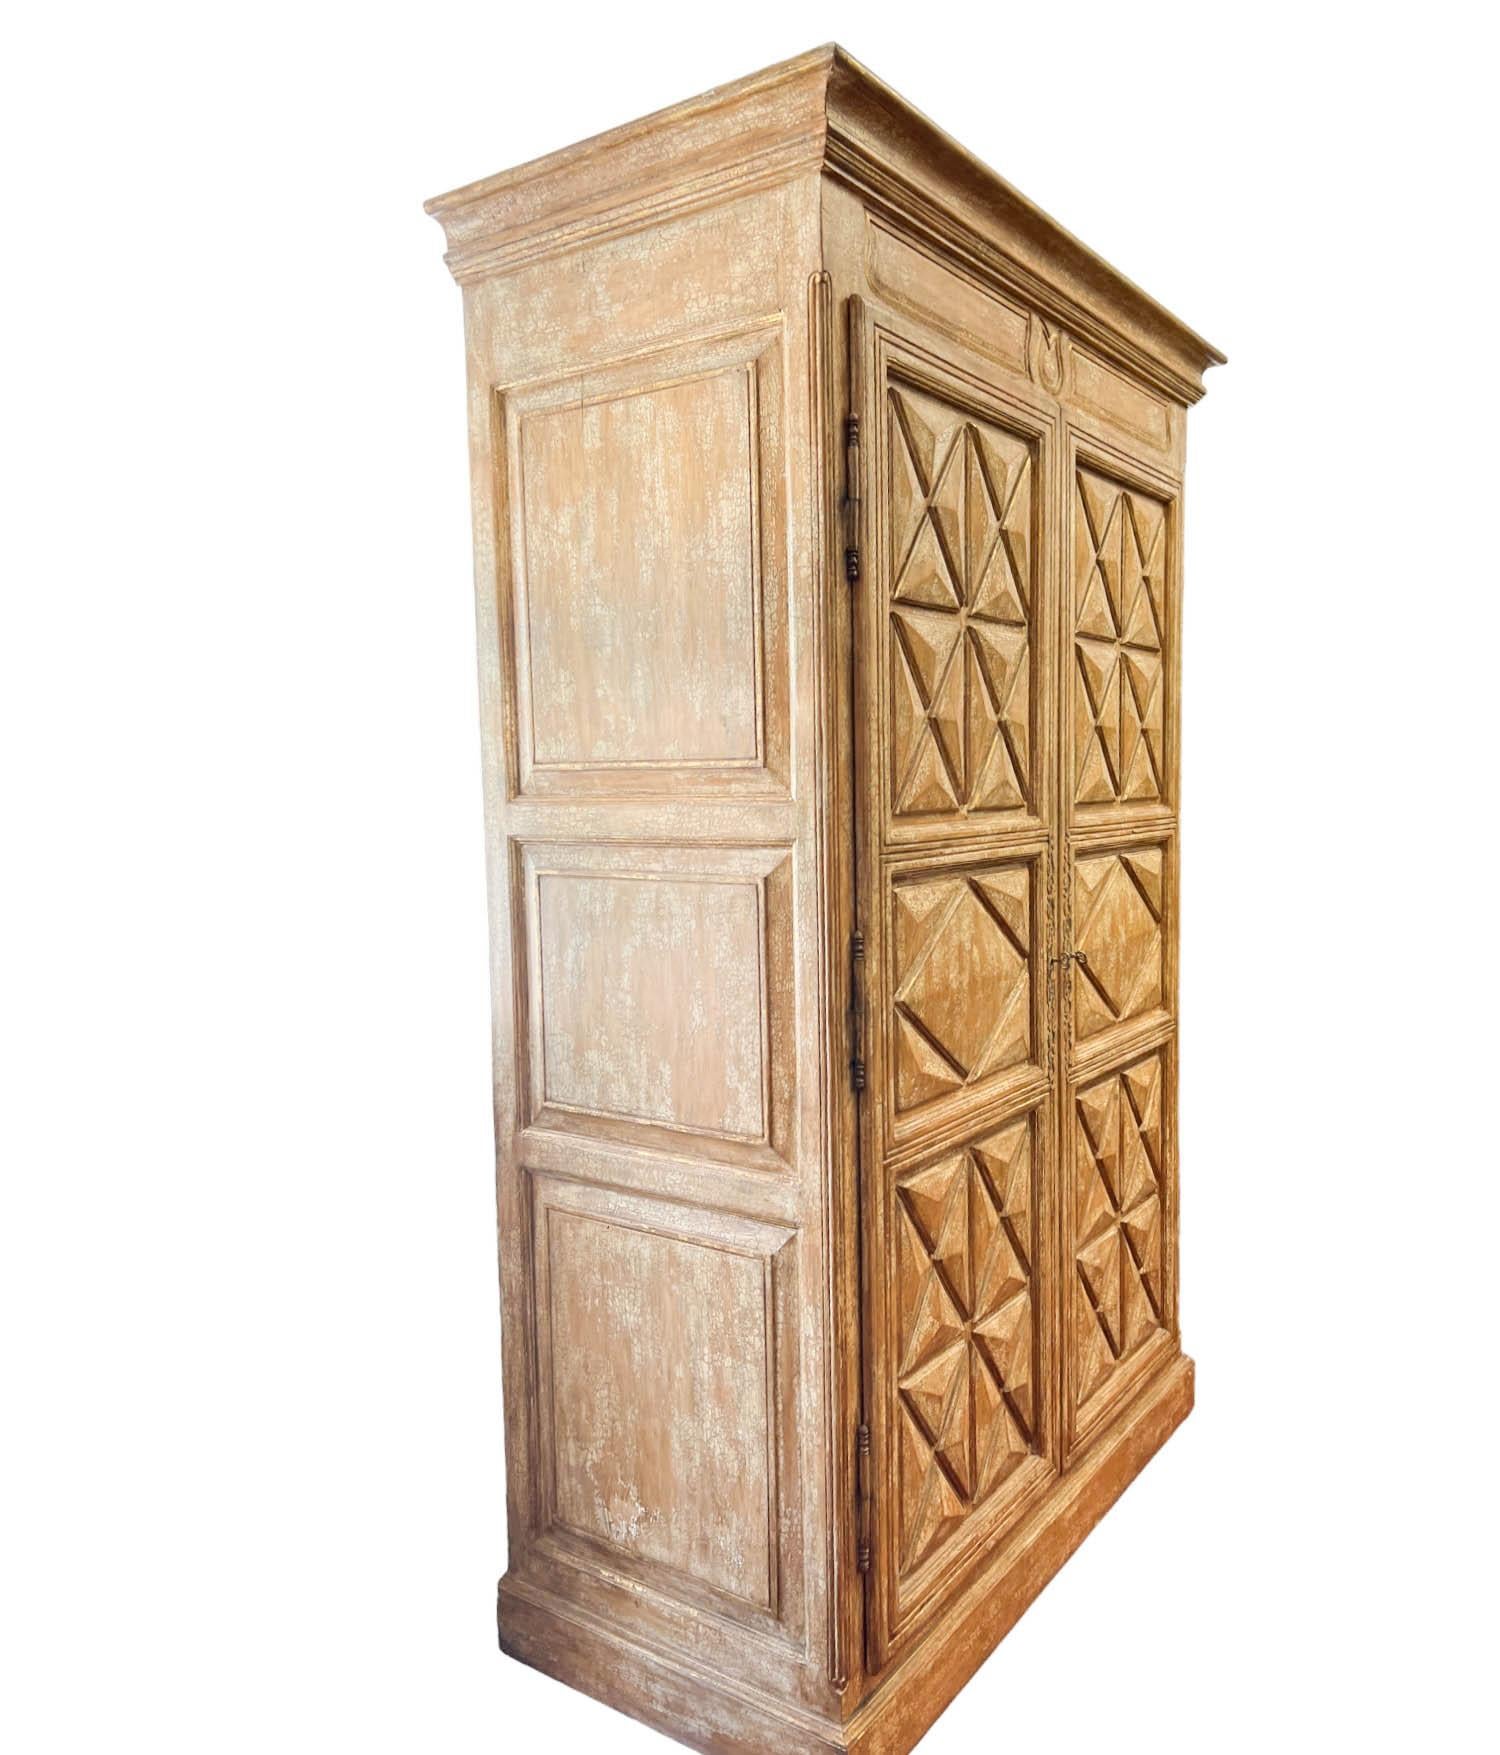 A Large-Scale Rustic-Inspired Armoire, a versatile and visually striking piece that effortlessly blends rustic charm with modern esthetics. The armoire's 3D paneled exterior is finished in a crackled paint technique, accentuated by gold leaf